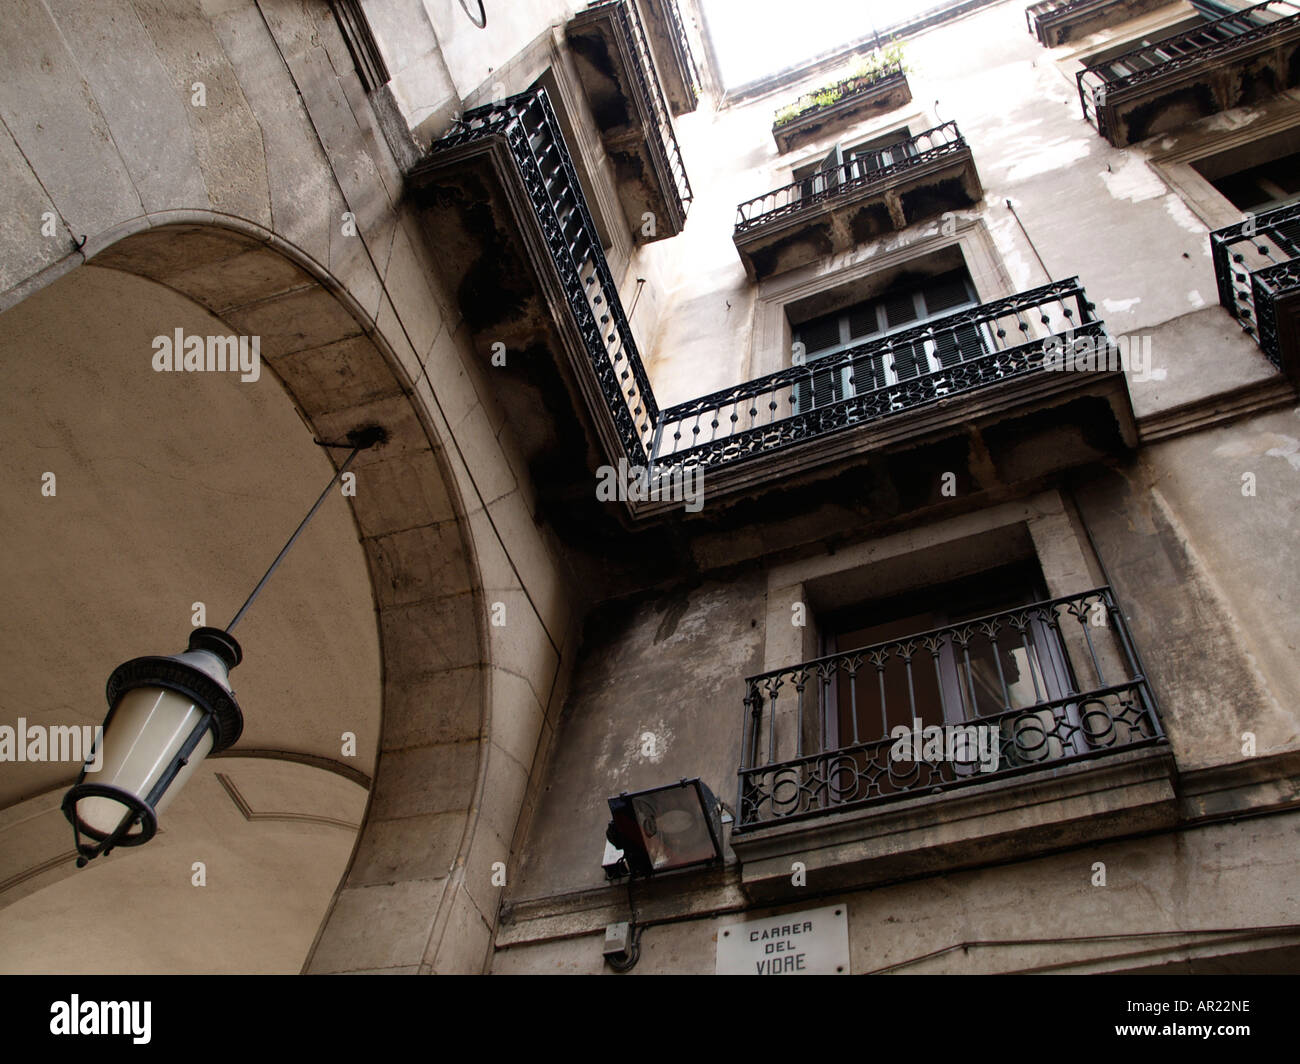 Vaulted arch and balconies in Placa Real Barcelona Spain Stock Photo